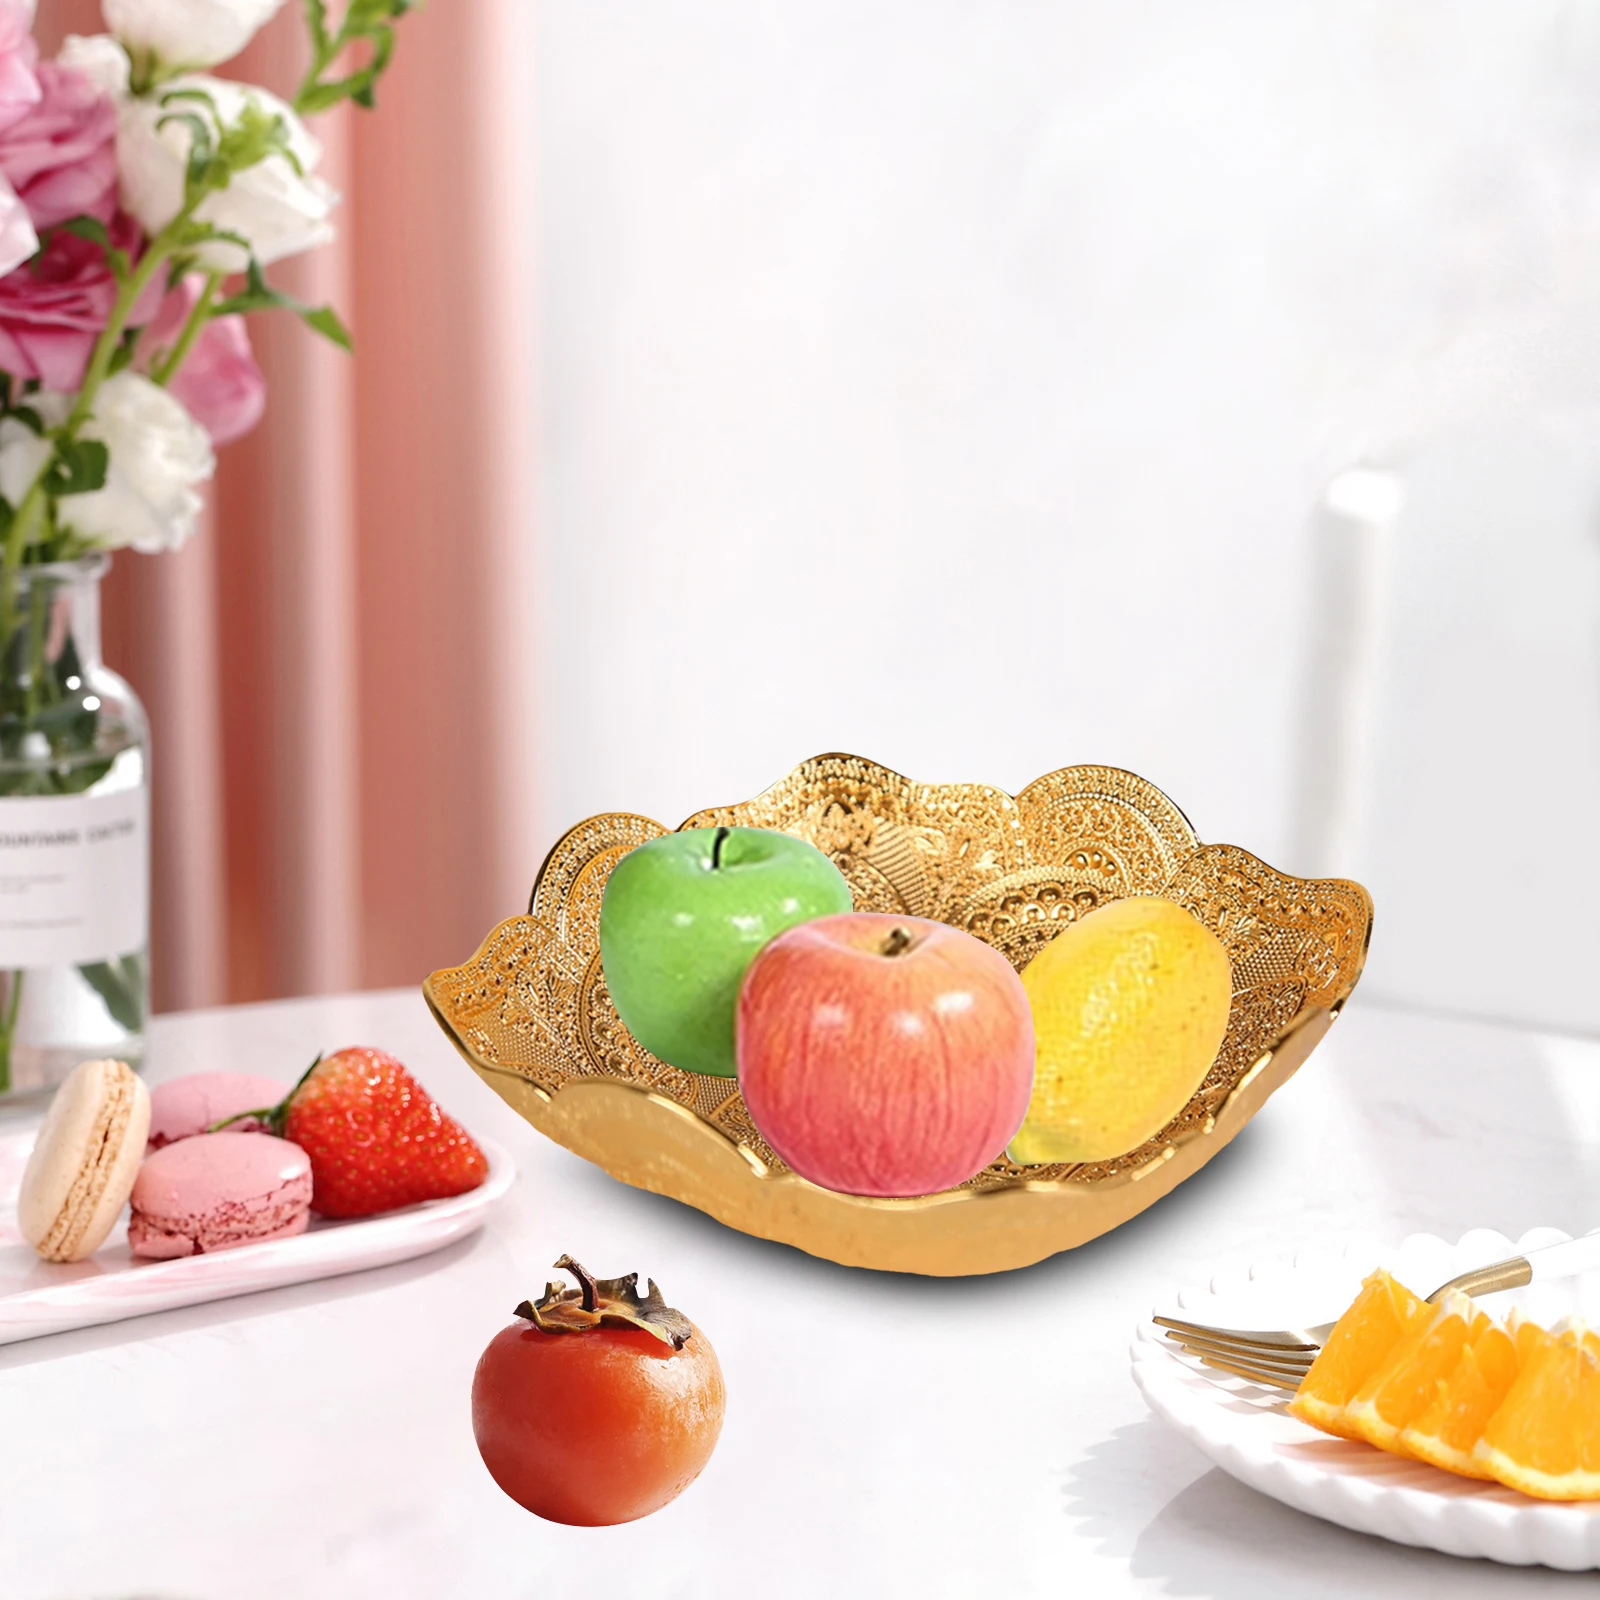 Gold Fruit Plate Trinket Jewelry Earrings Necklace Dish Decorative Cupcake Candy Snack Tray Bowl Centerpiece Home Party Decor